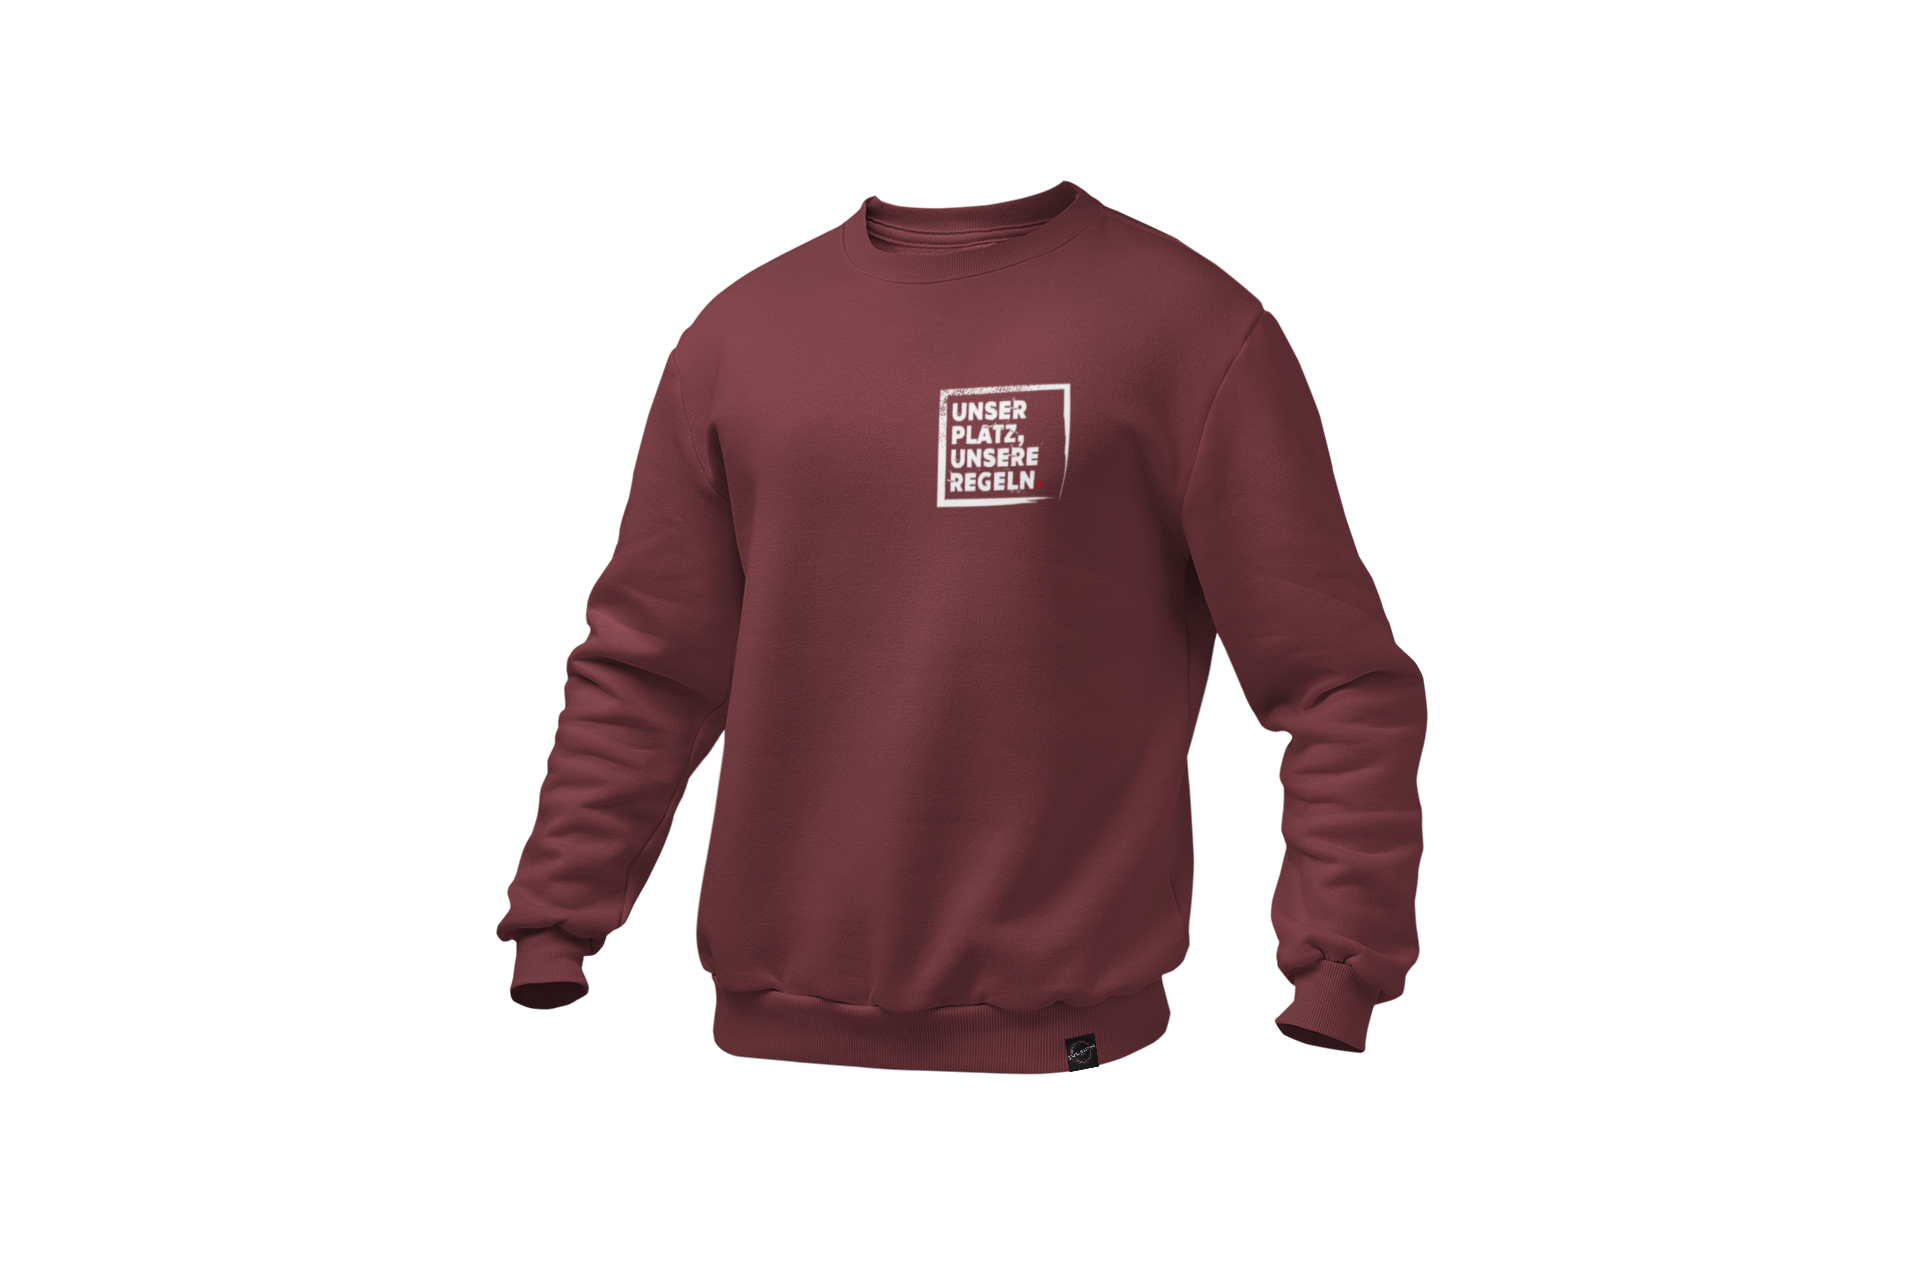 mockup-of-a-ghosted-crewneck-sweatshirt-over-a-solid-background-26960 - 2021-02-09T161309.925.png